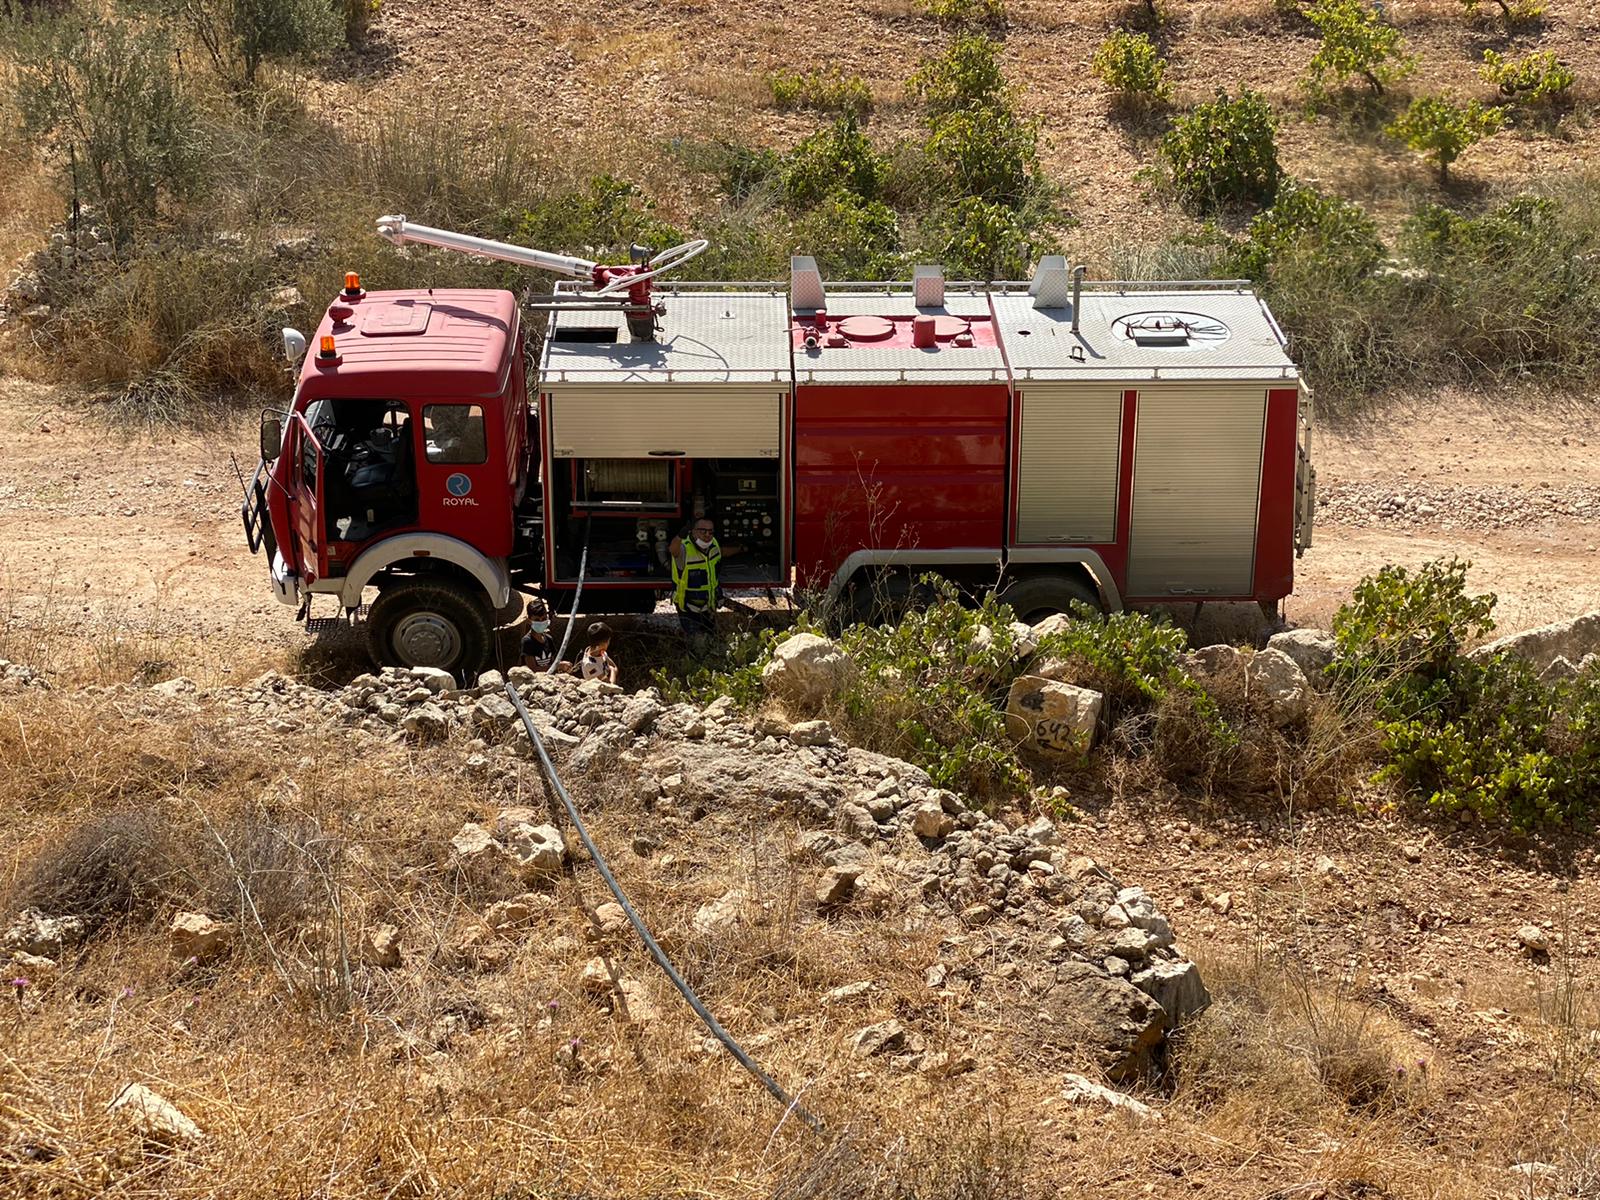 Firefighters and Royal crews participate in extinguishing the fires of Wadi Qaf